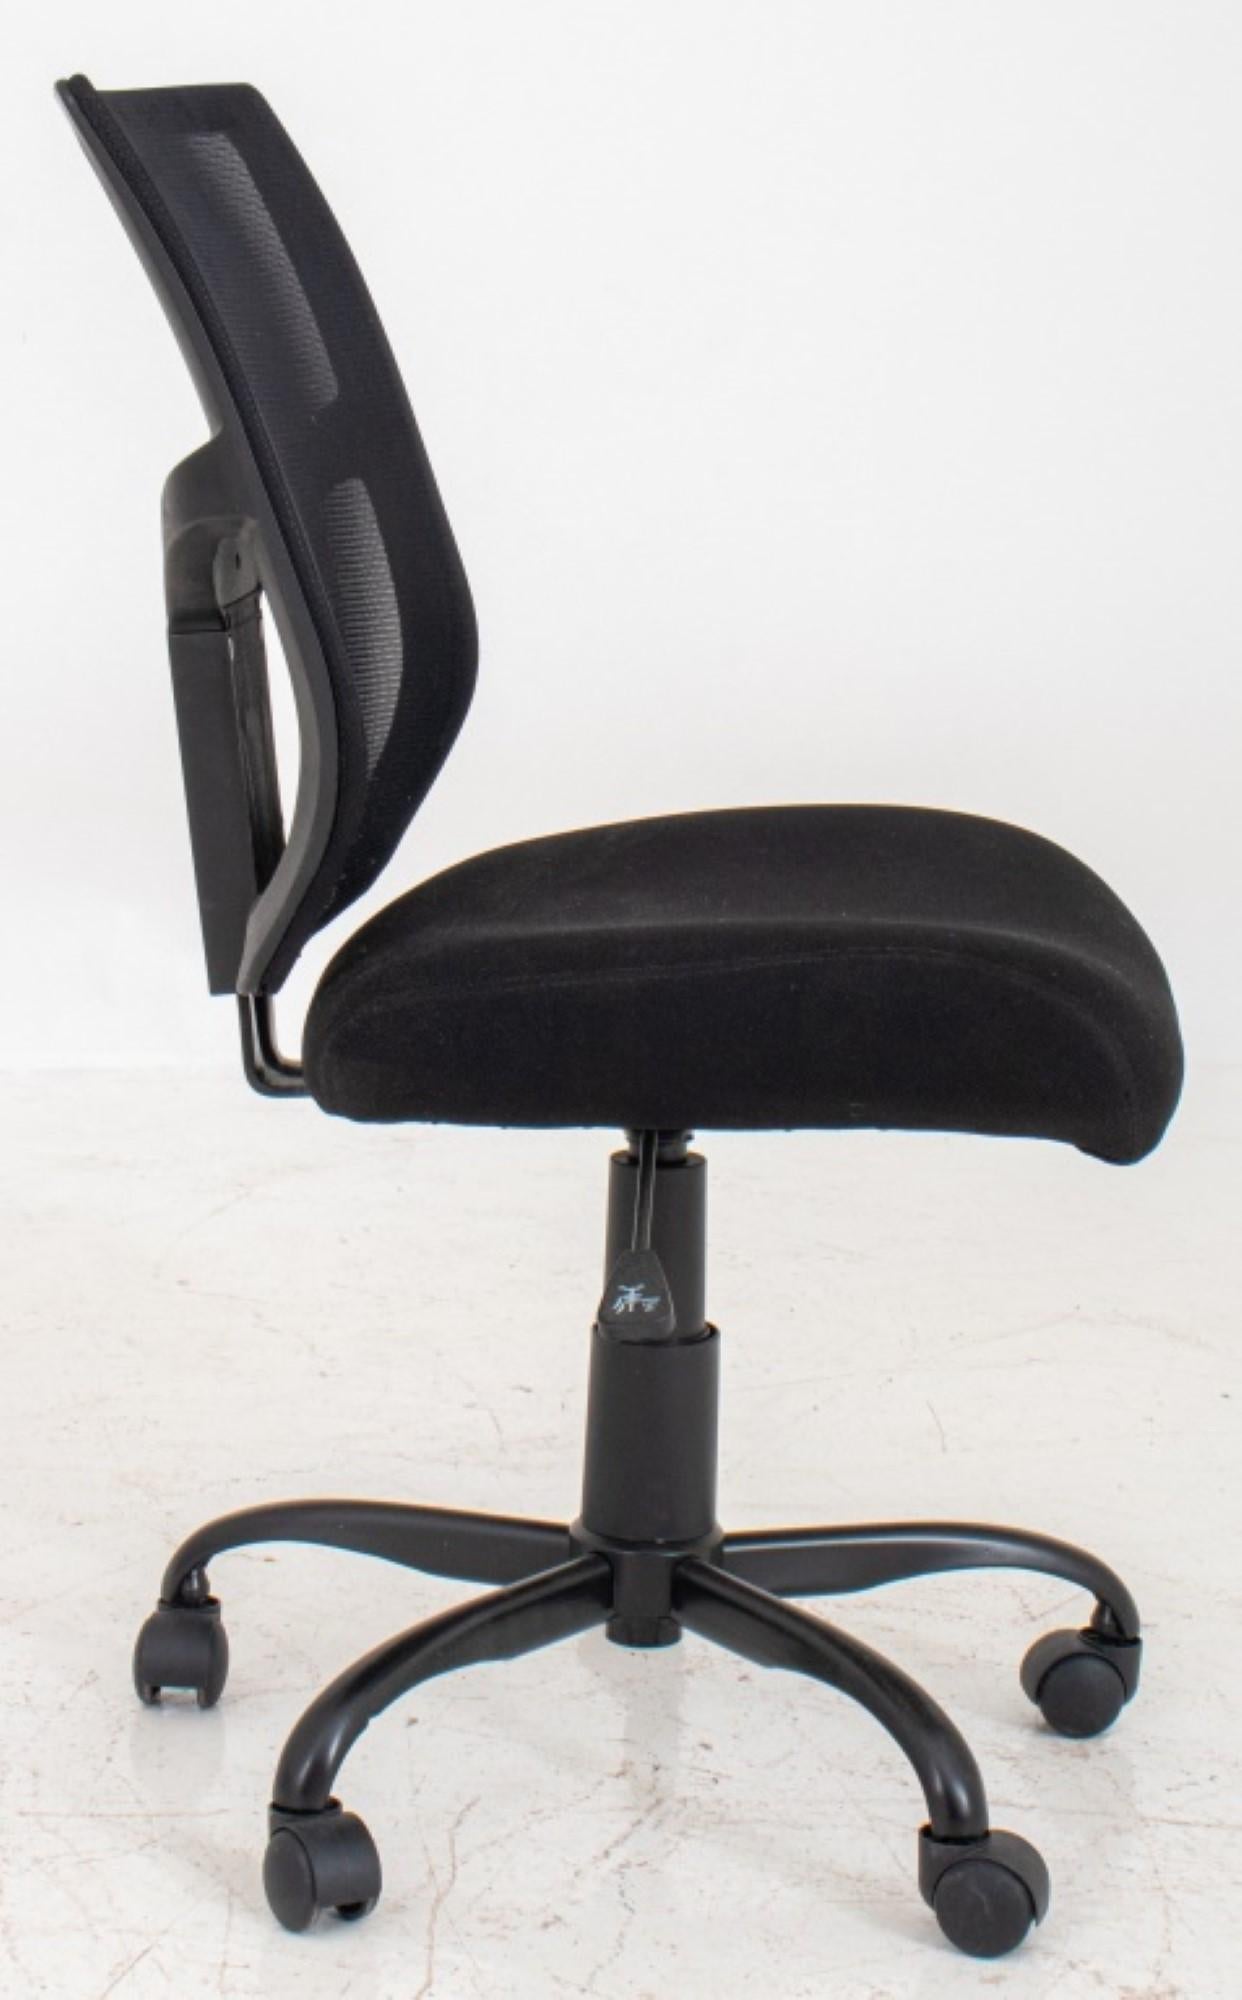 Adjustable armless black fabric task chair, with a five-caster base.

36 inches in height, 19.5 inches in width, and 19.5 inches in depth; seated height is 21 inches.